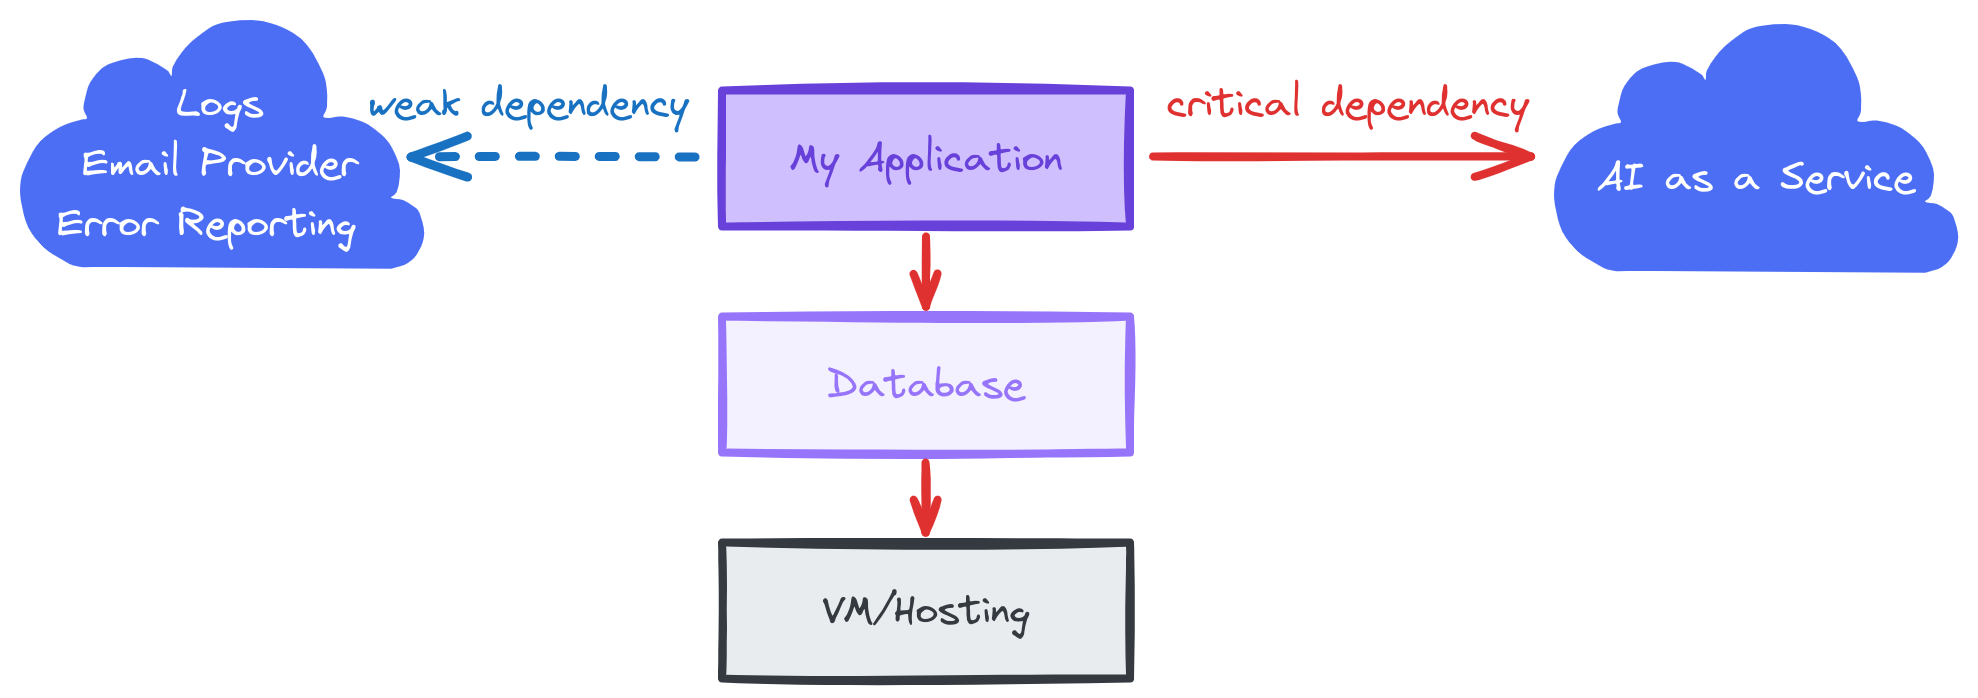 Diagram showing an application stack of hosting > Database > My Application and weak dependencies on logging, error reporting, etc. Then a critical dependency on an external AI as a Service. 